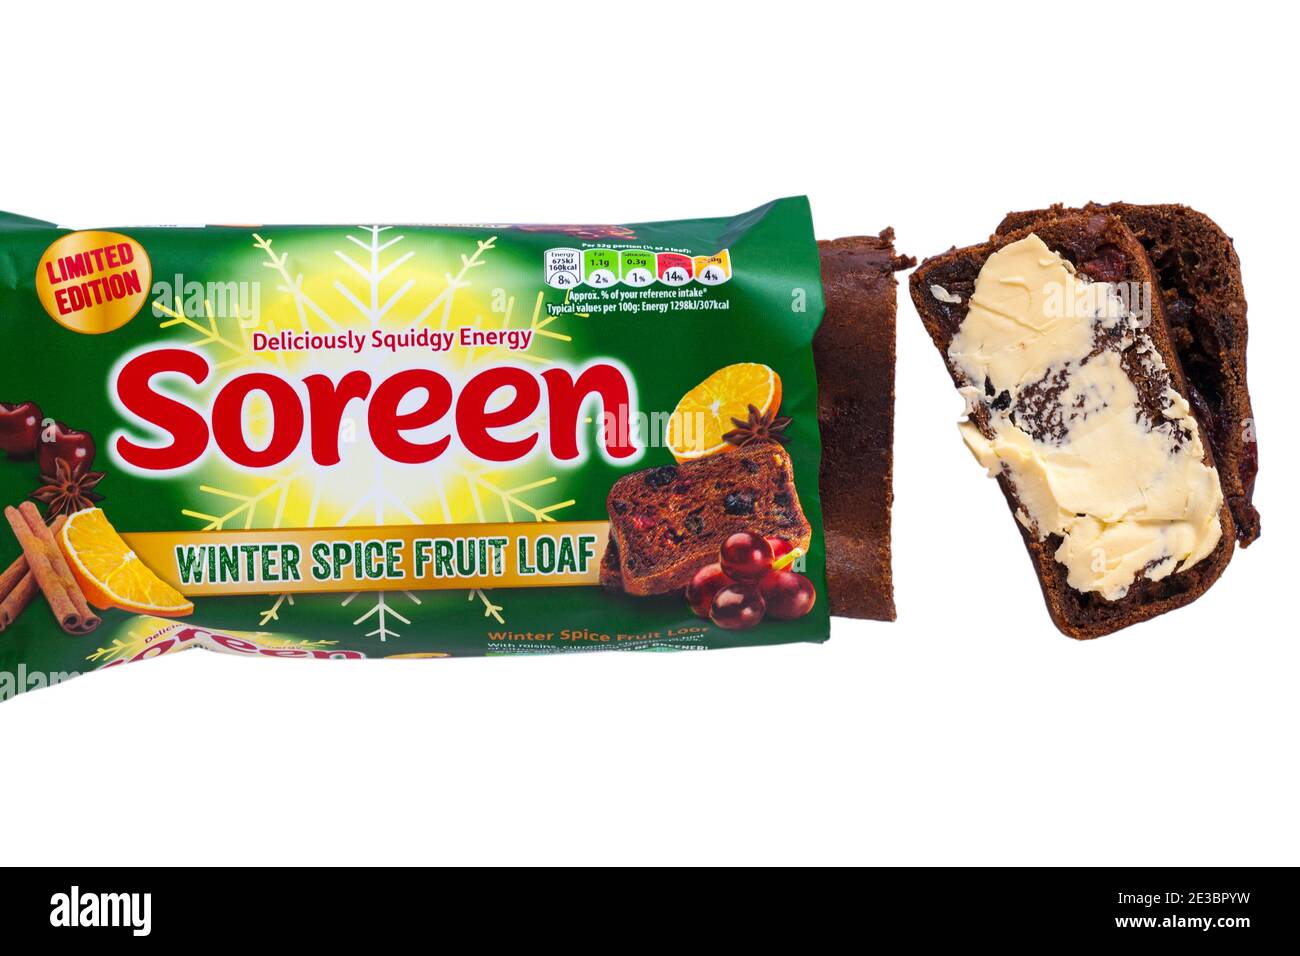 Soreen Winter Spice Fruit Loaf limited edition deliciously squidgy energy opened to show contents with slices cut and buttered set on white background Stock Photo